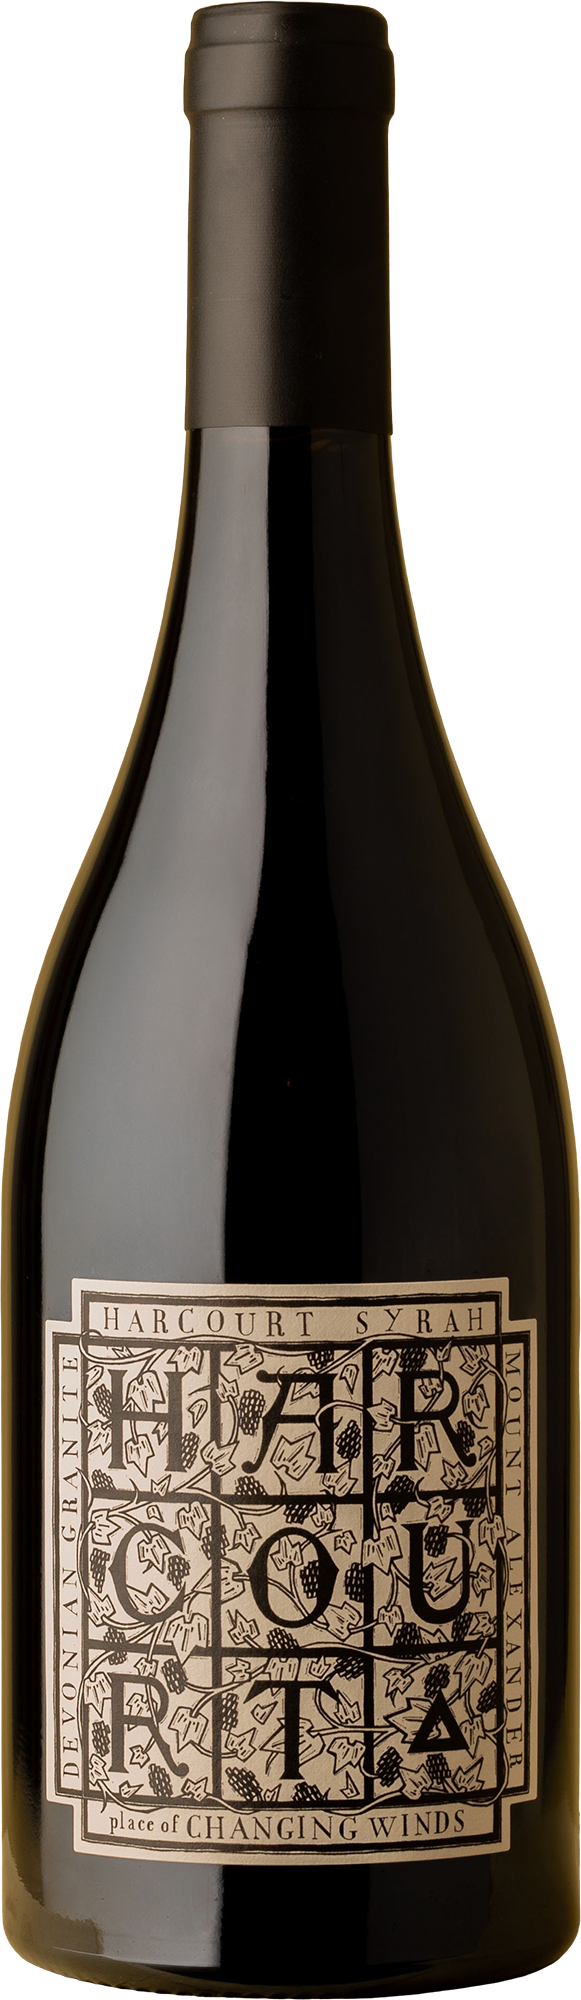 Place of Changing Winds - Harcourt Syrah 2021 Red Wine